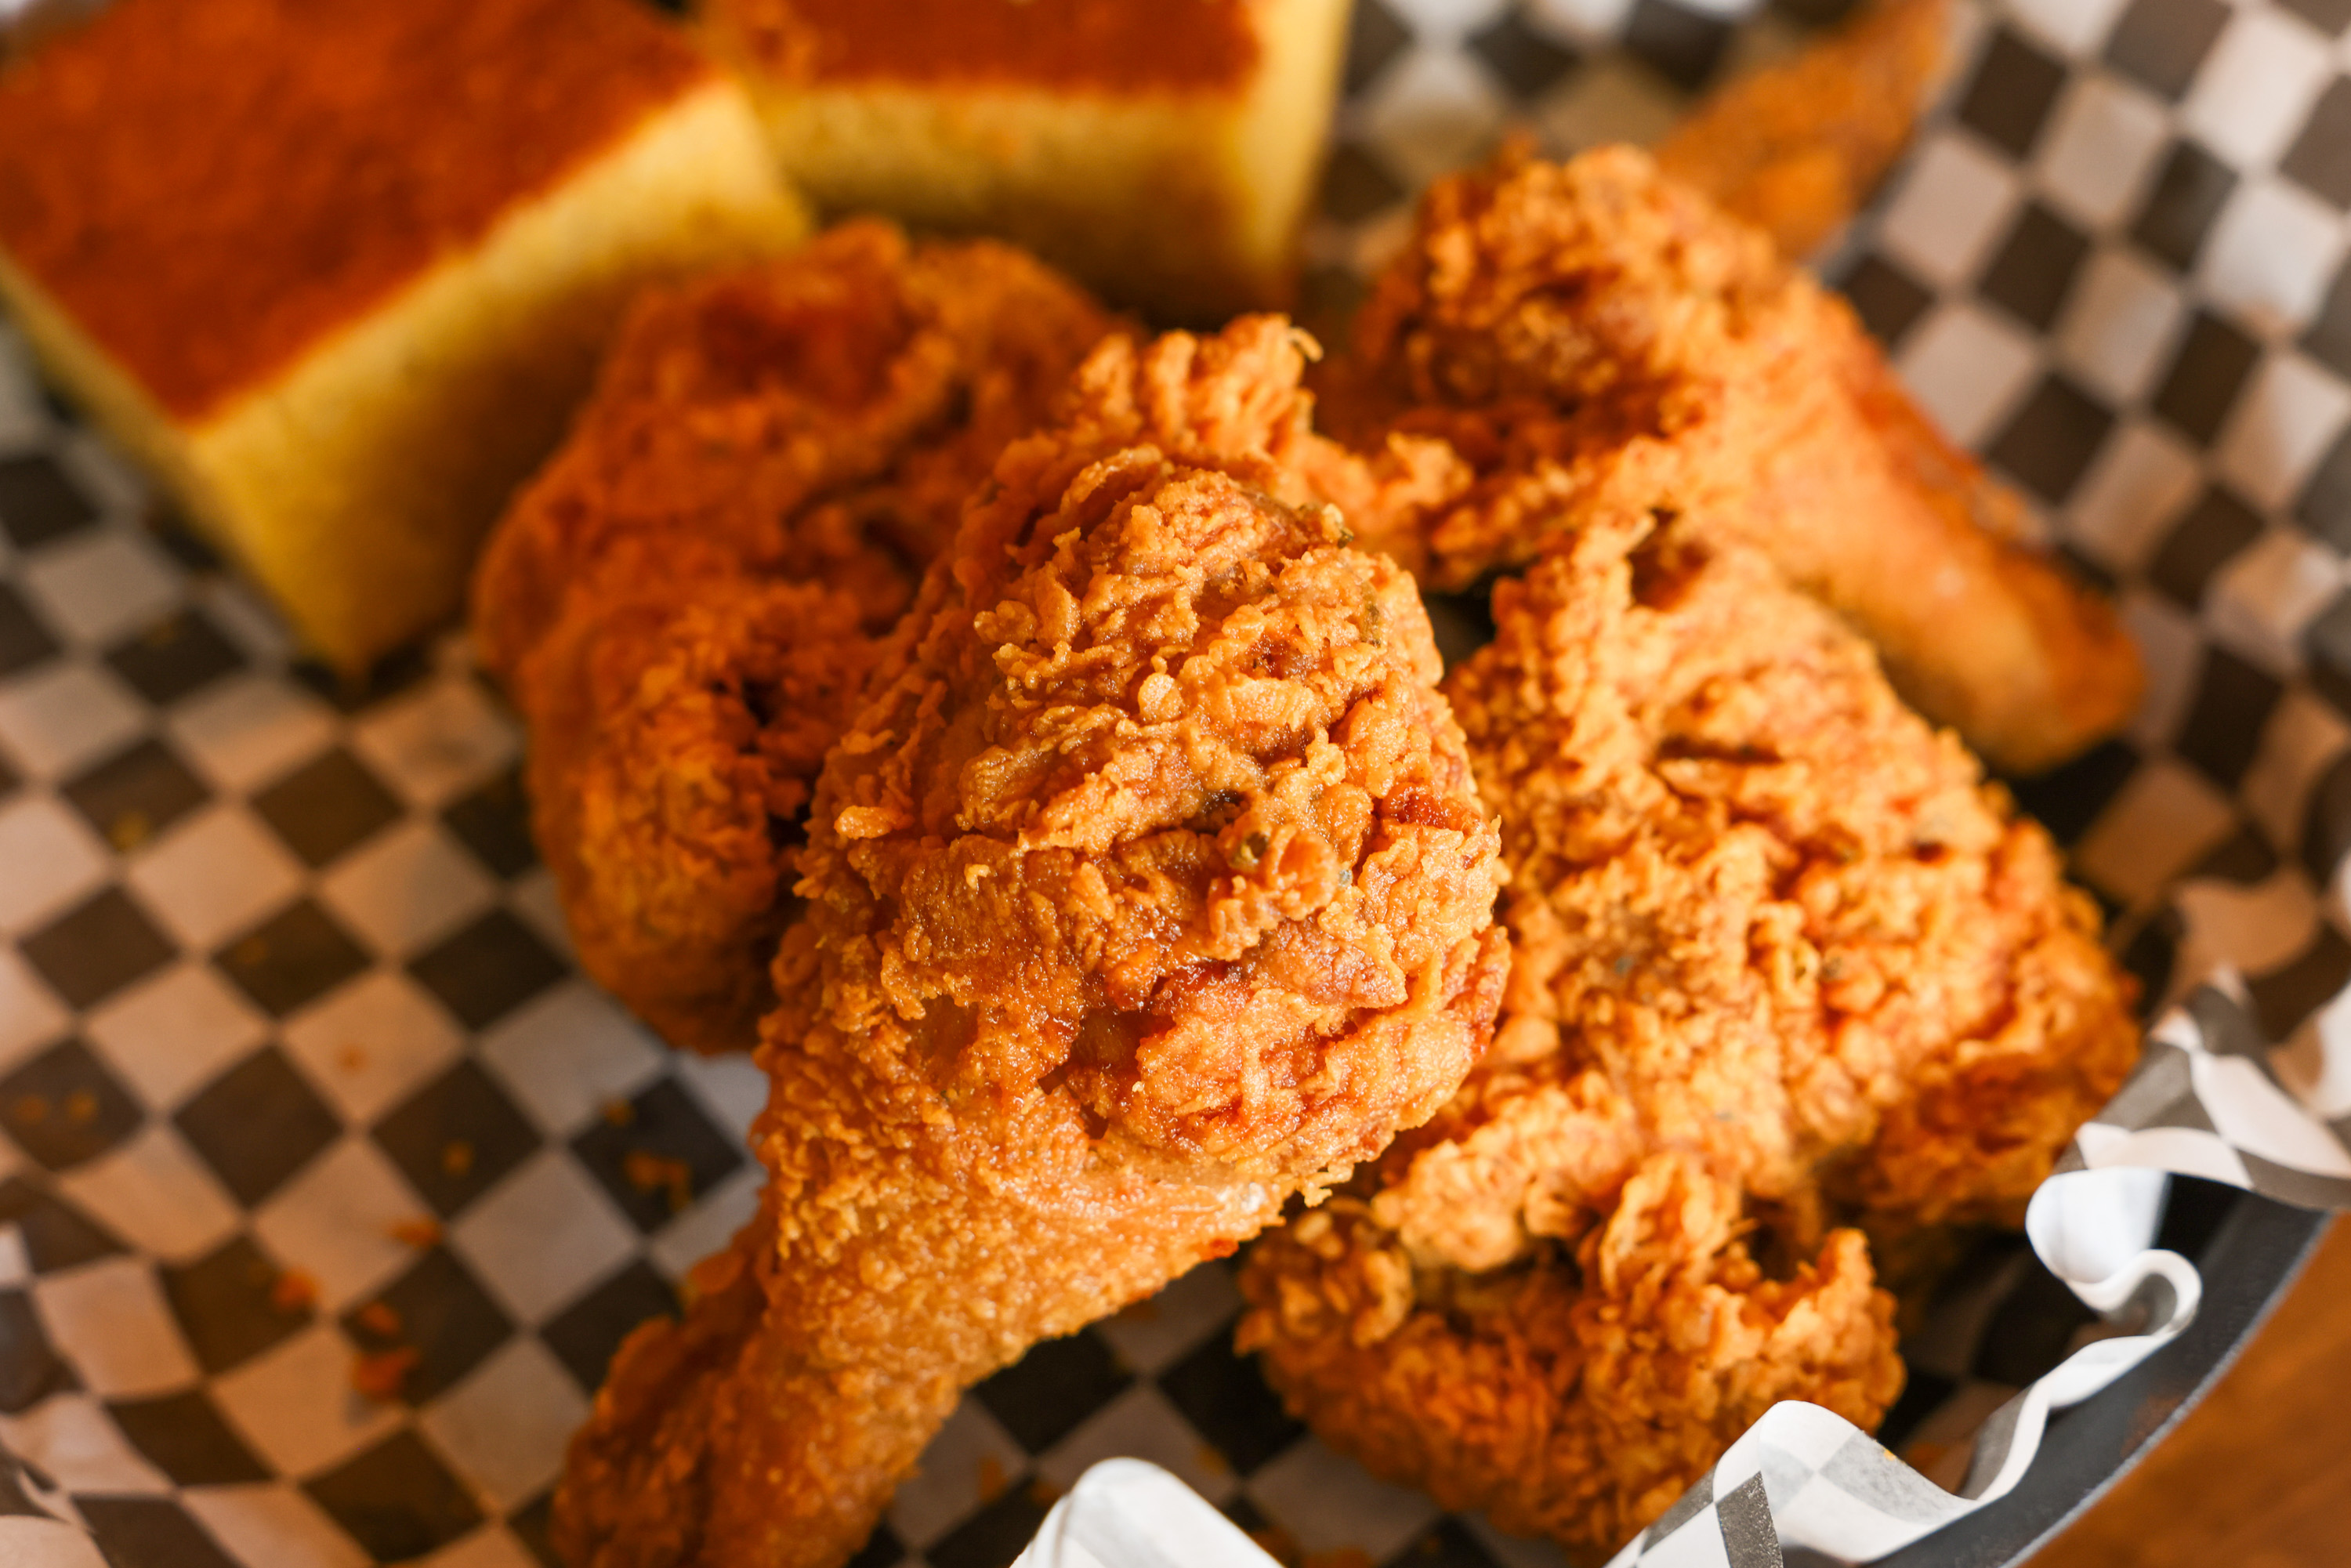 Crispy fried chicken pieces beside cornbread in a basket with checkered paper liner.